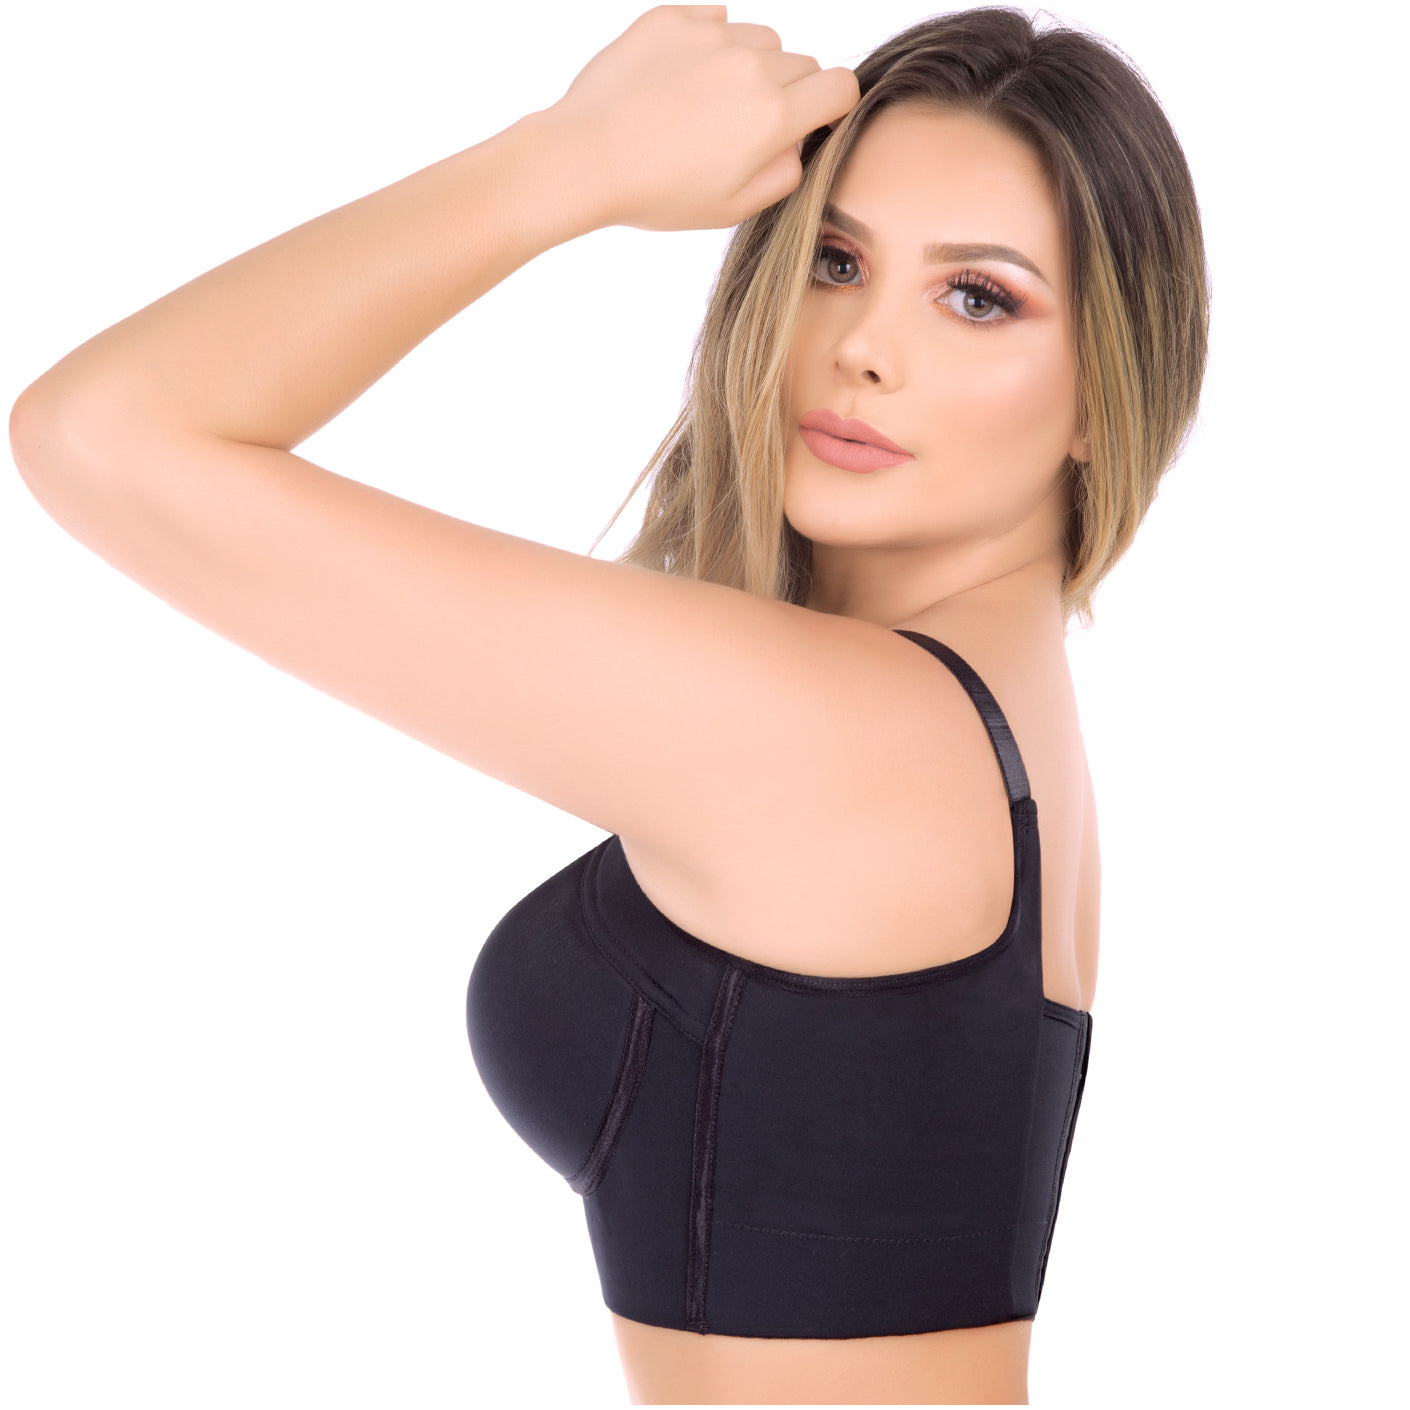 UpLady 8532  Extra Firm High Compression Full Cup Push Up Brassier – Miss  Curvas